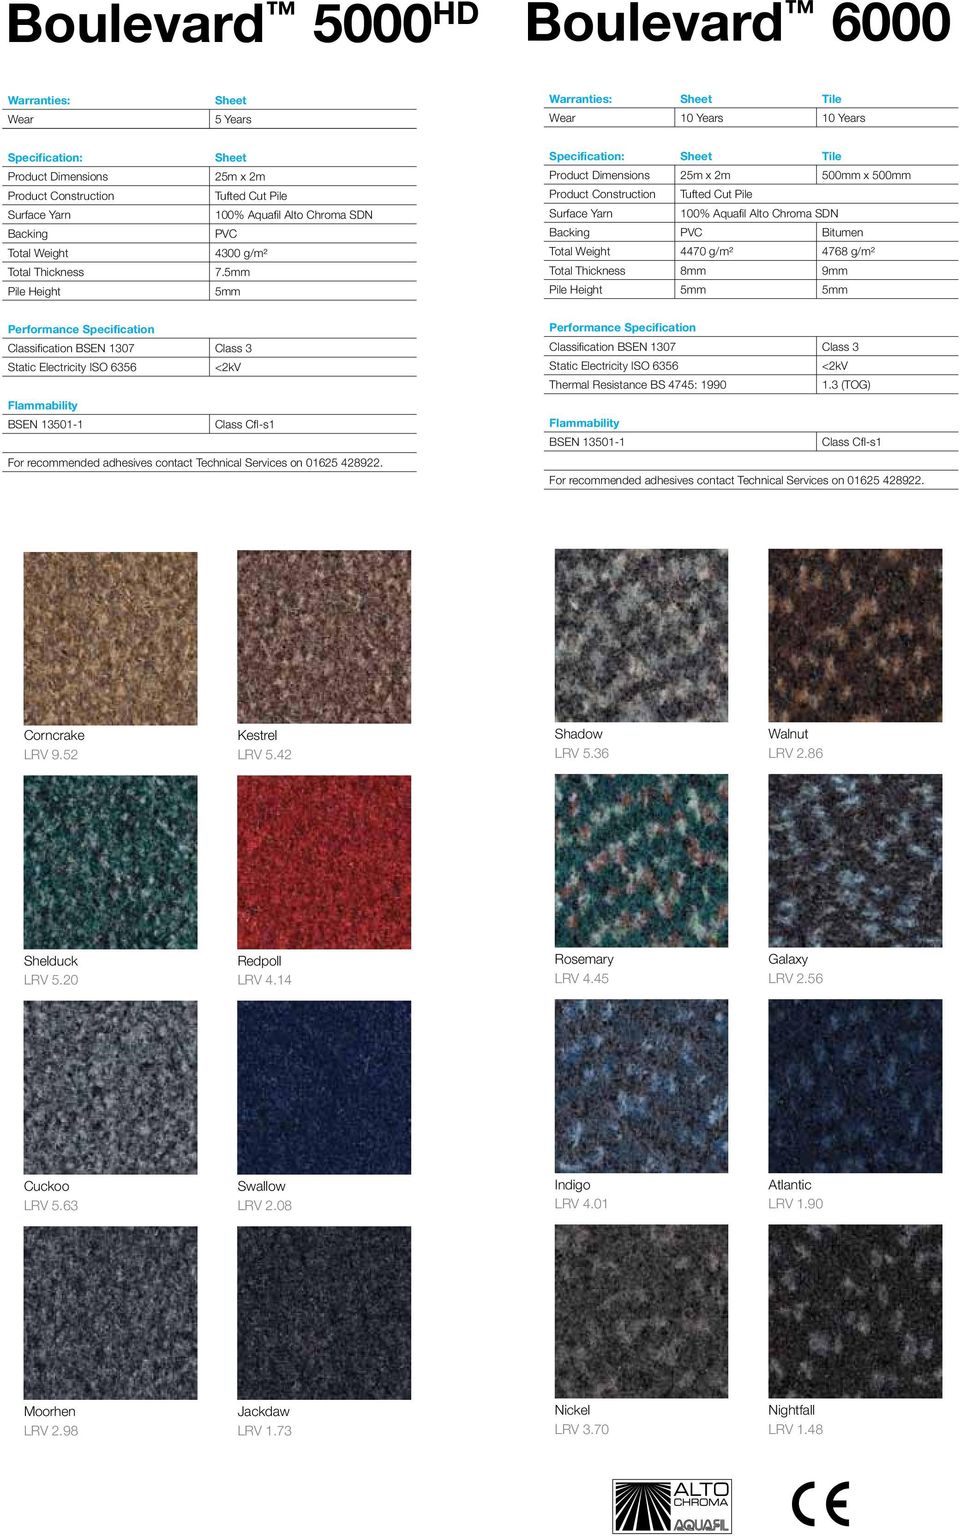 5mm 5mm Specification: Sheet Tile Product Dimensions 25m x 2m 500mm x 500mm Product Construction Tufted Cut Pile Surface Yarn 100% Aquafil Alto Chroma SDN Backing PVC Bitumen Total Weight 4470 g/m²